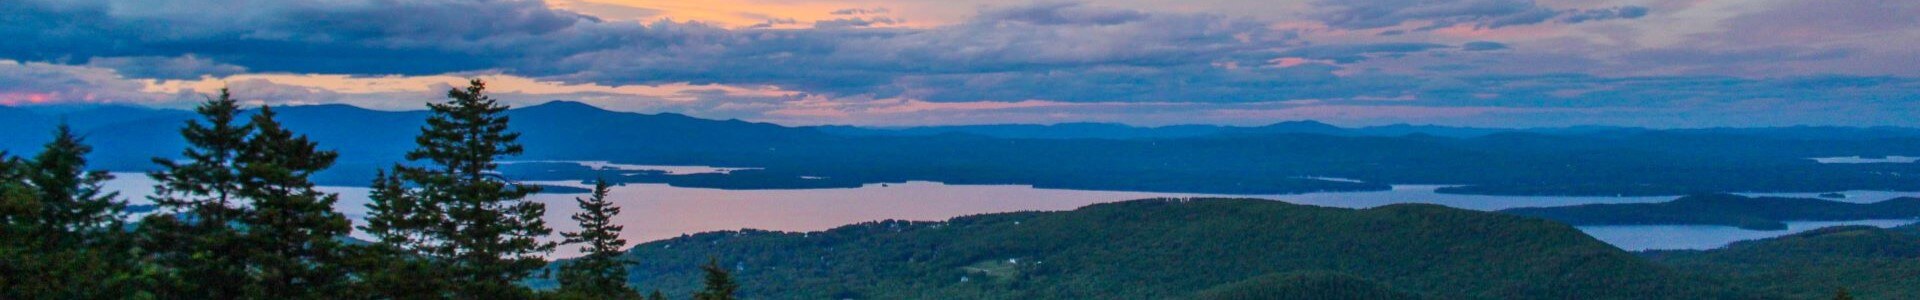 sunset view of the lake from Gunstock summit.